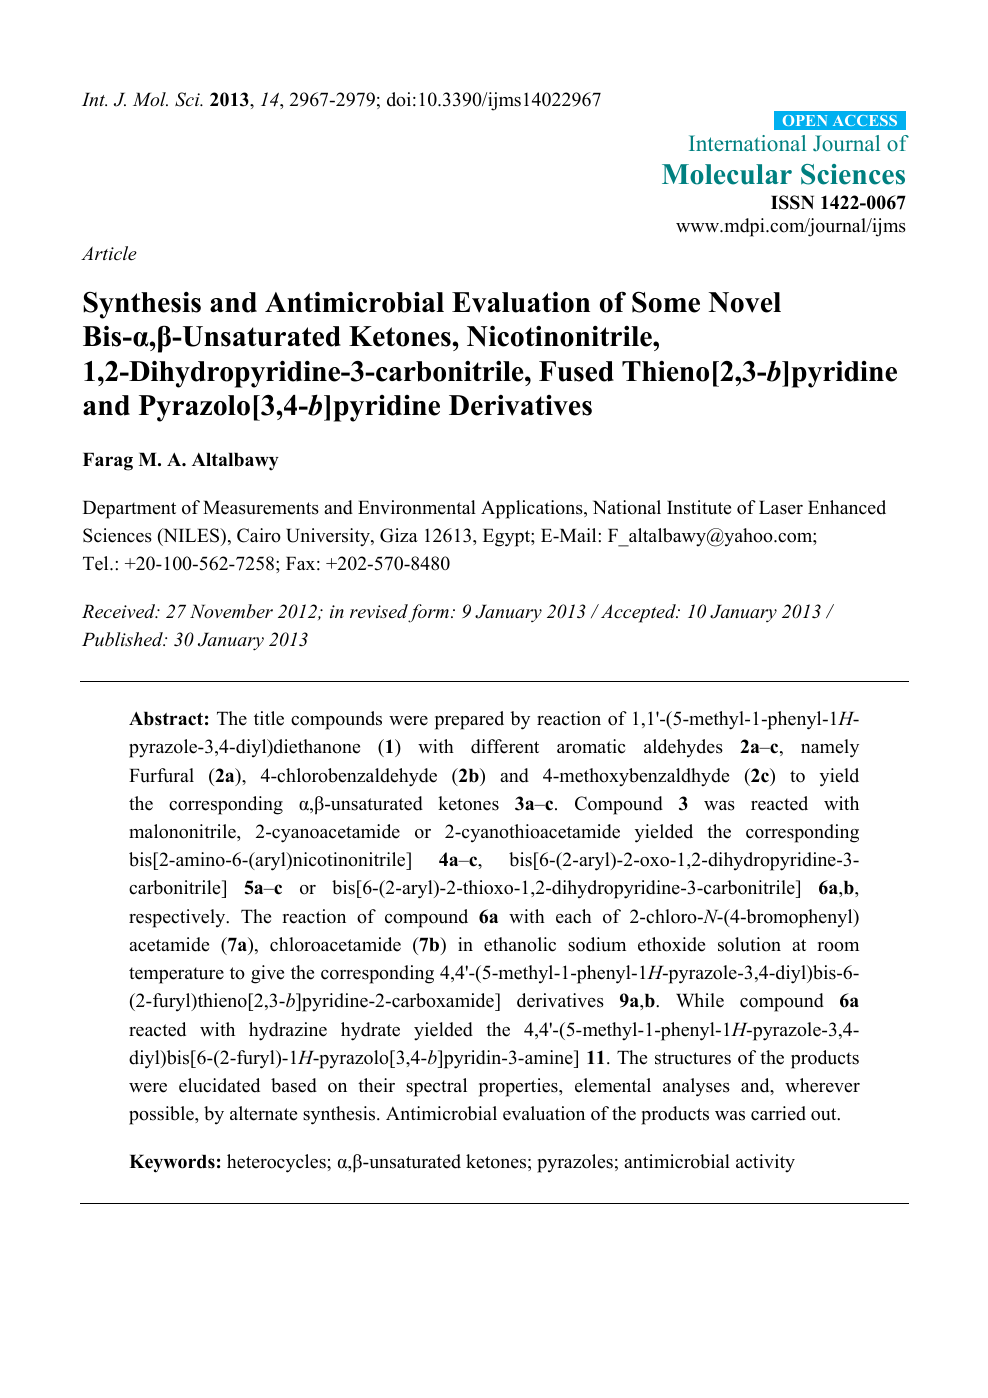 Synthesis And Antimicrobial Evaluation Of Some Novel Bis A B Unsaturated Ketones Nicotinonitrile 1 2 Dihydropyridine 3 Carbonitrile Fused Thieno 2 3 B Pyridine And Pyrazolo 3 4 B Pyridine Derivatives Topic Of Research Paper In Chemical Sciences